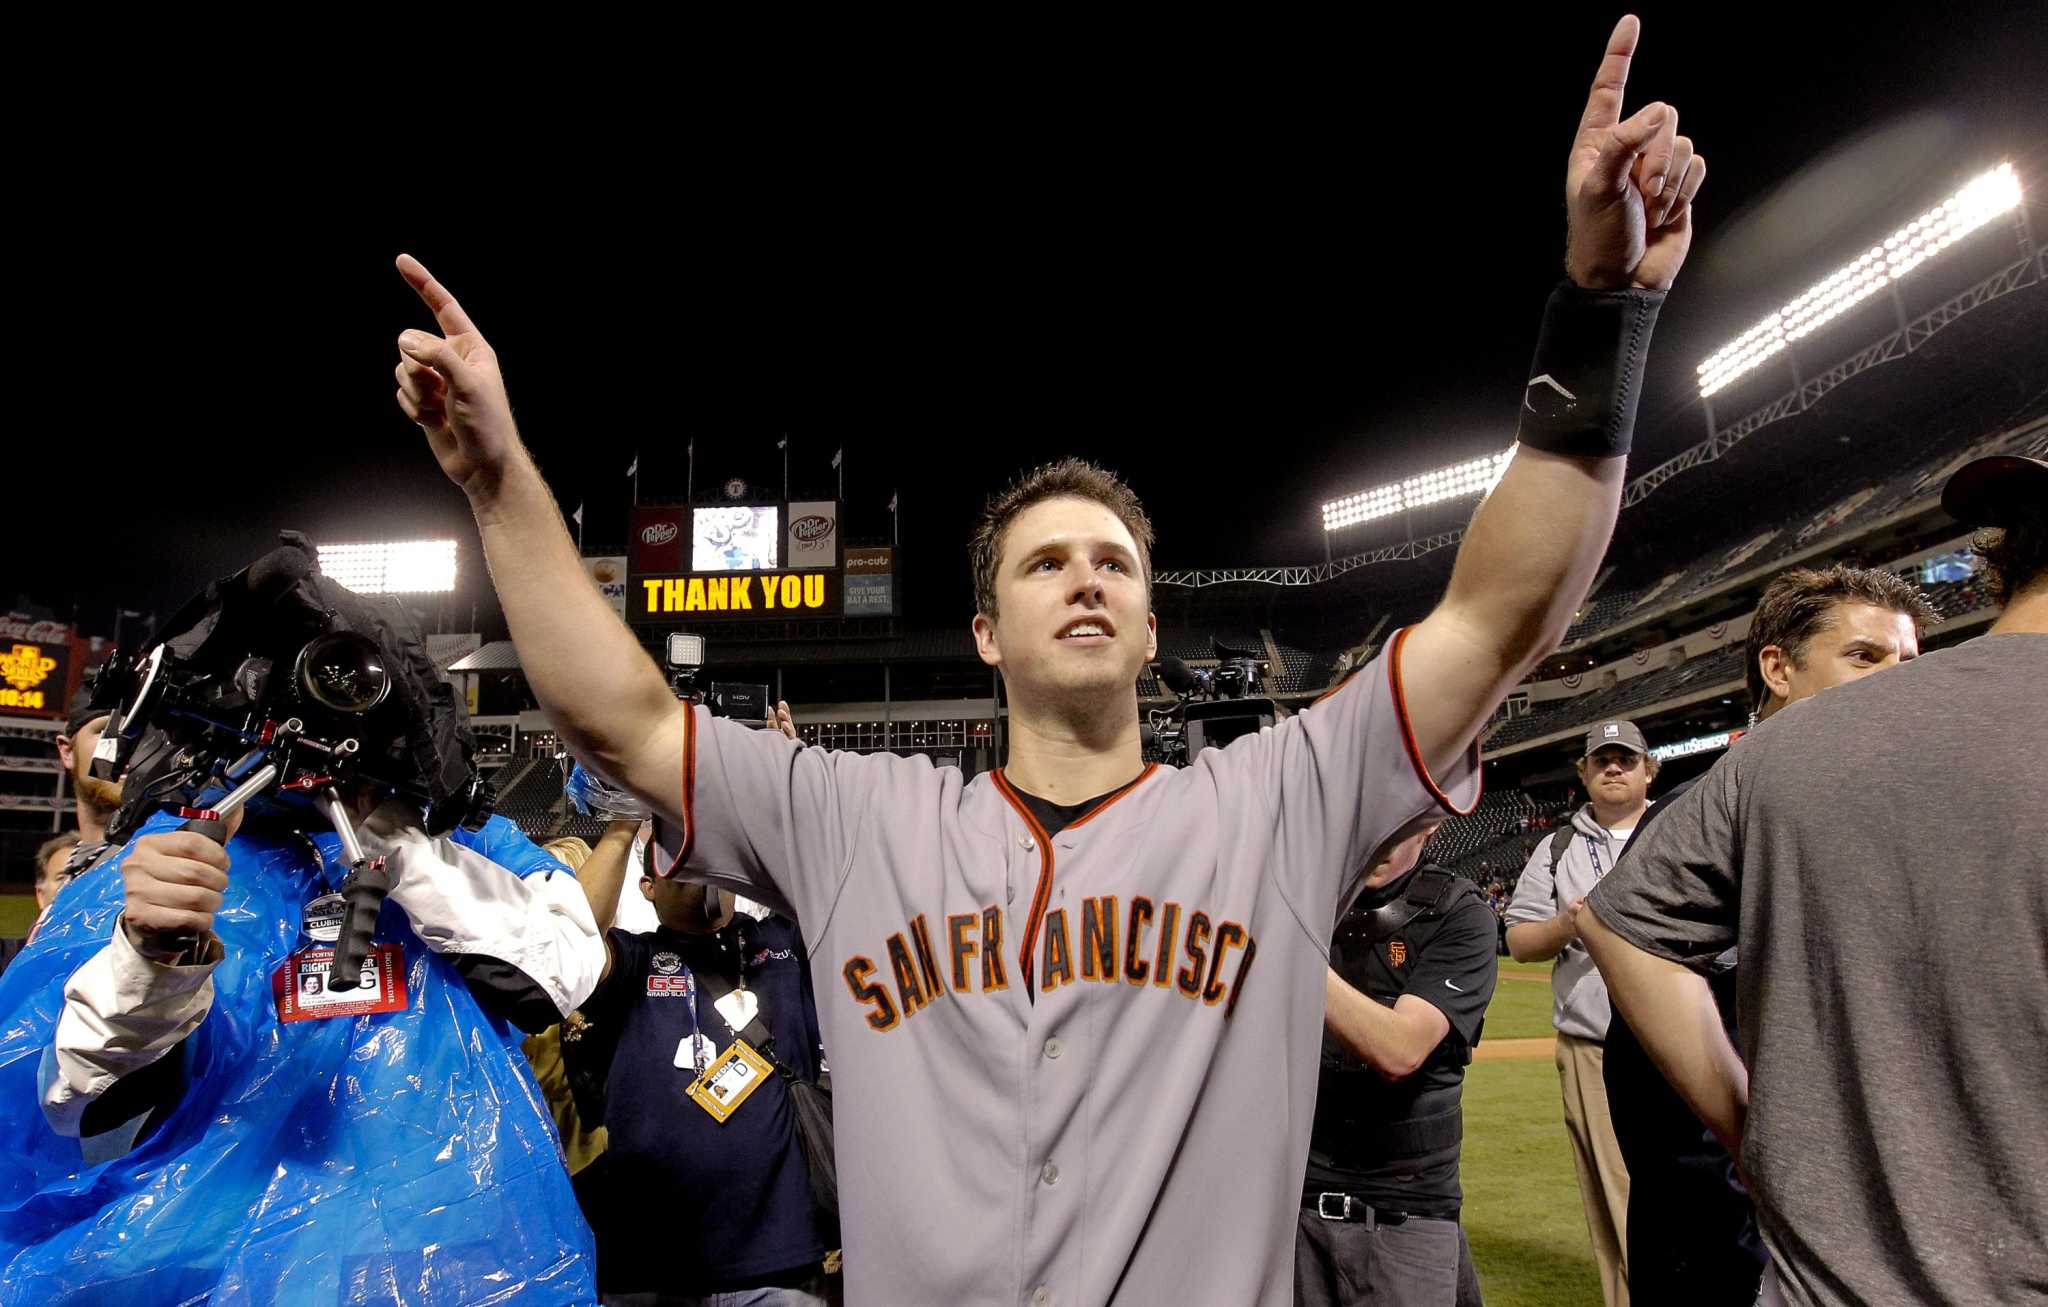 Where will the Giants put their Buster Posey and Barry Bonds statues?